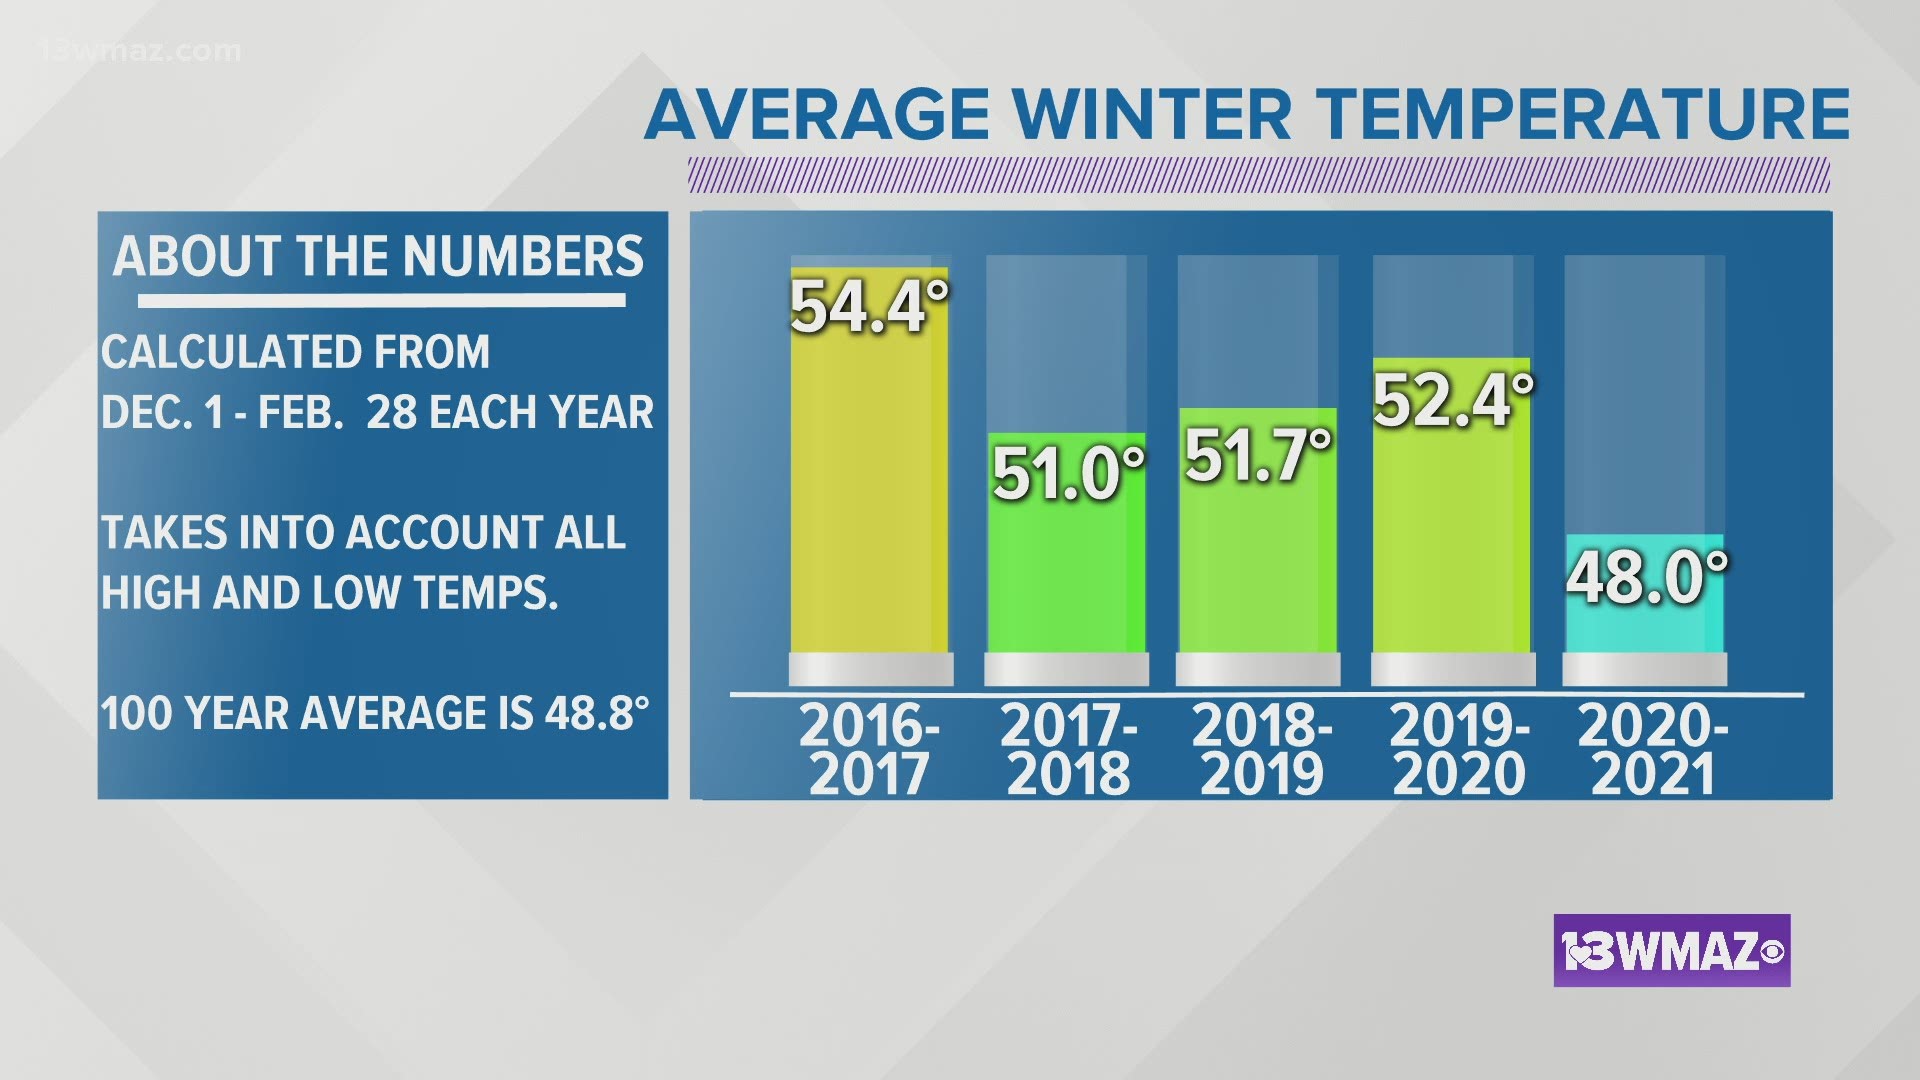 This winter is the first winter in five years to feature near average temperatures